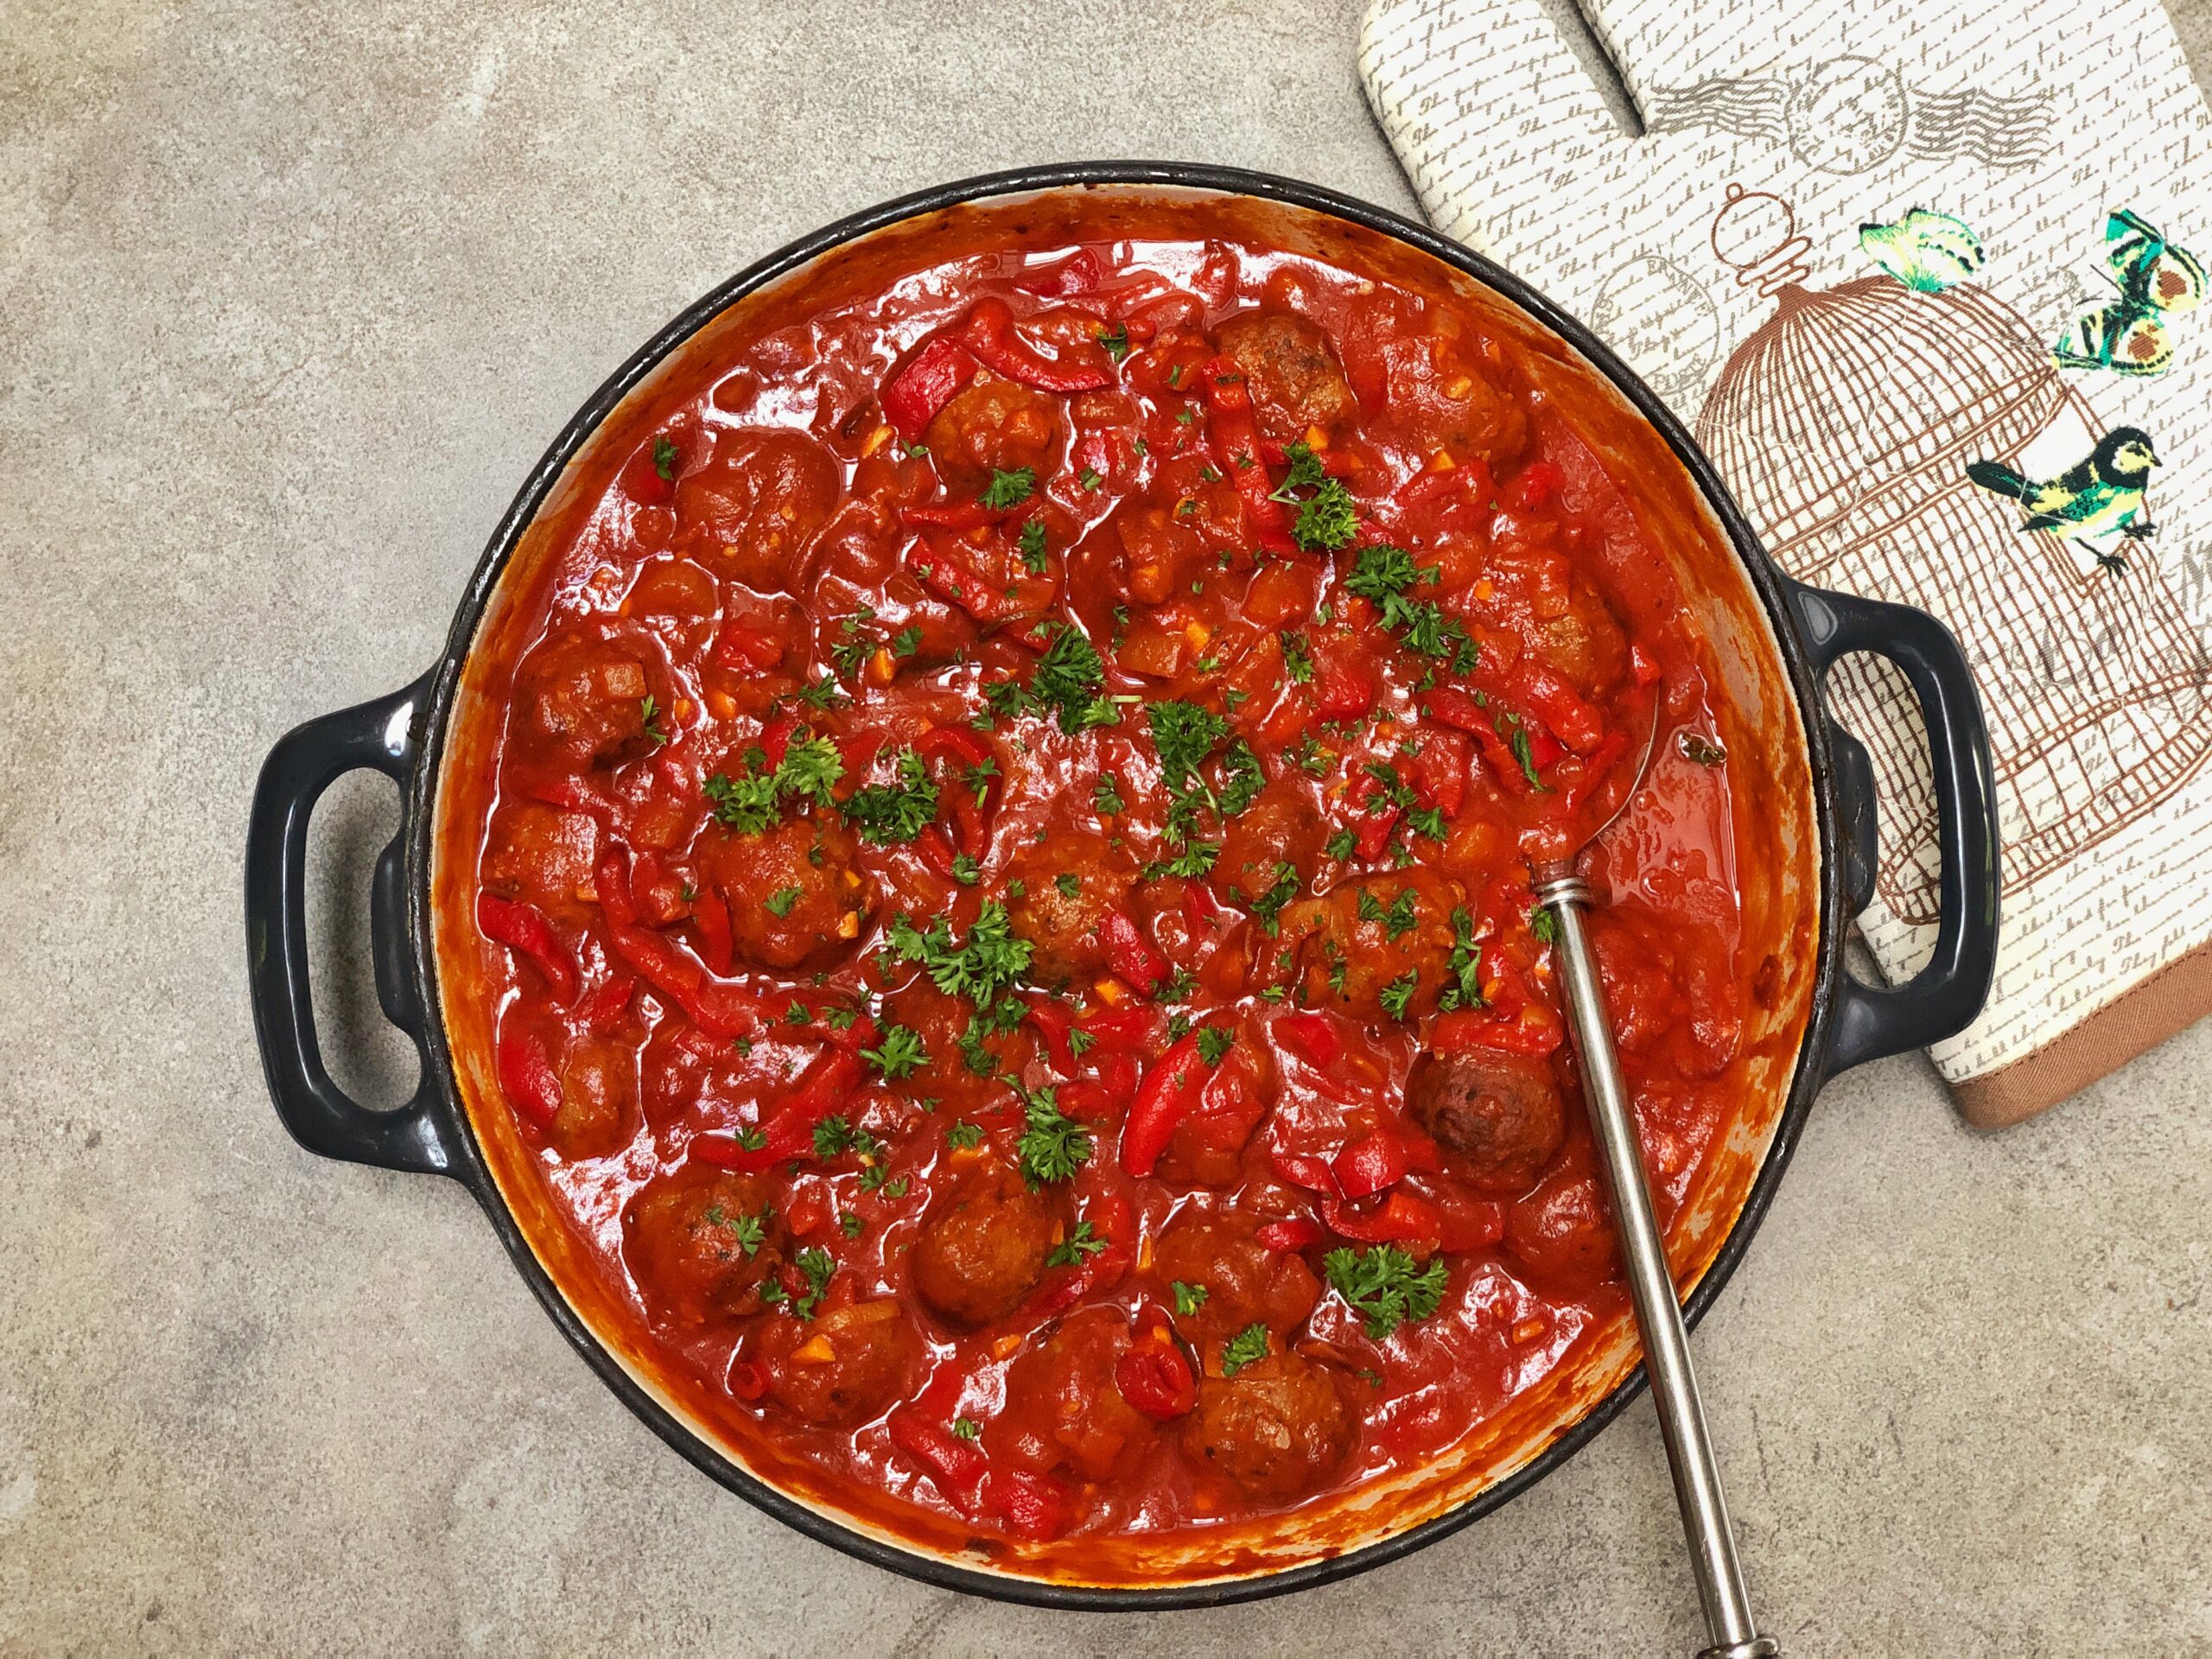 Healthy meatballs in a rich tomato sauce